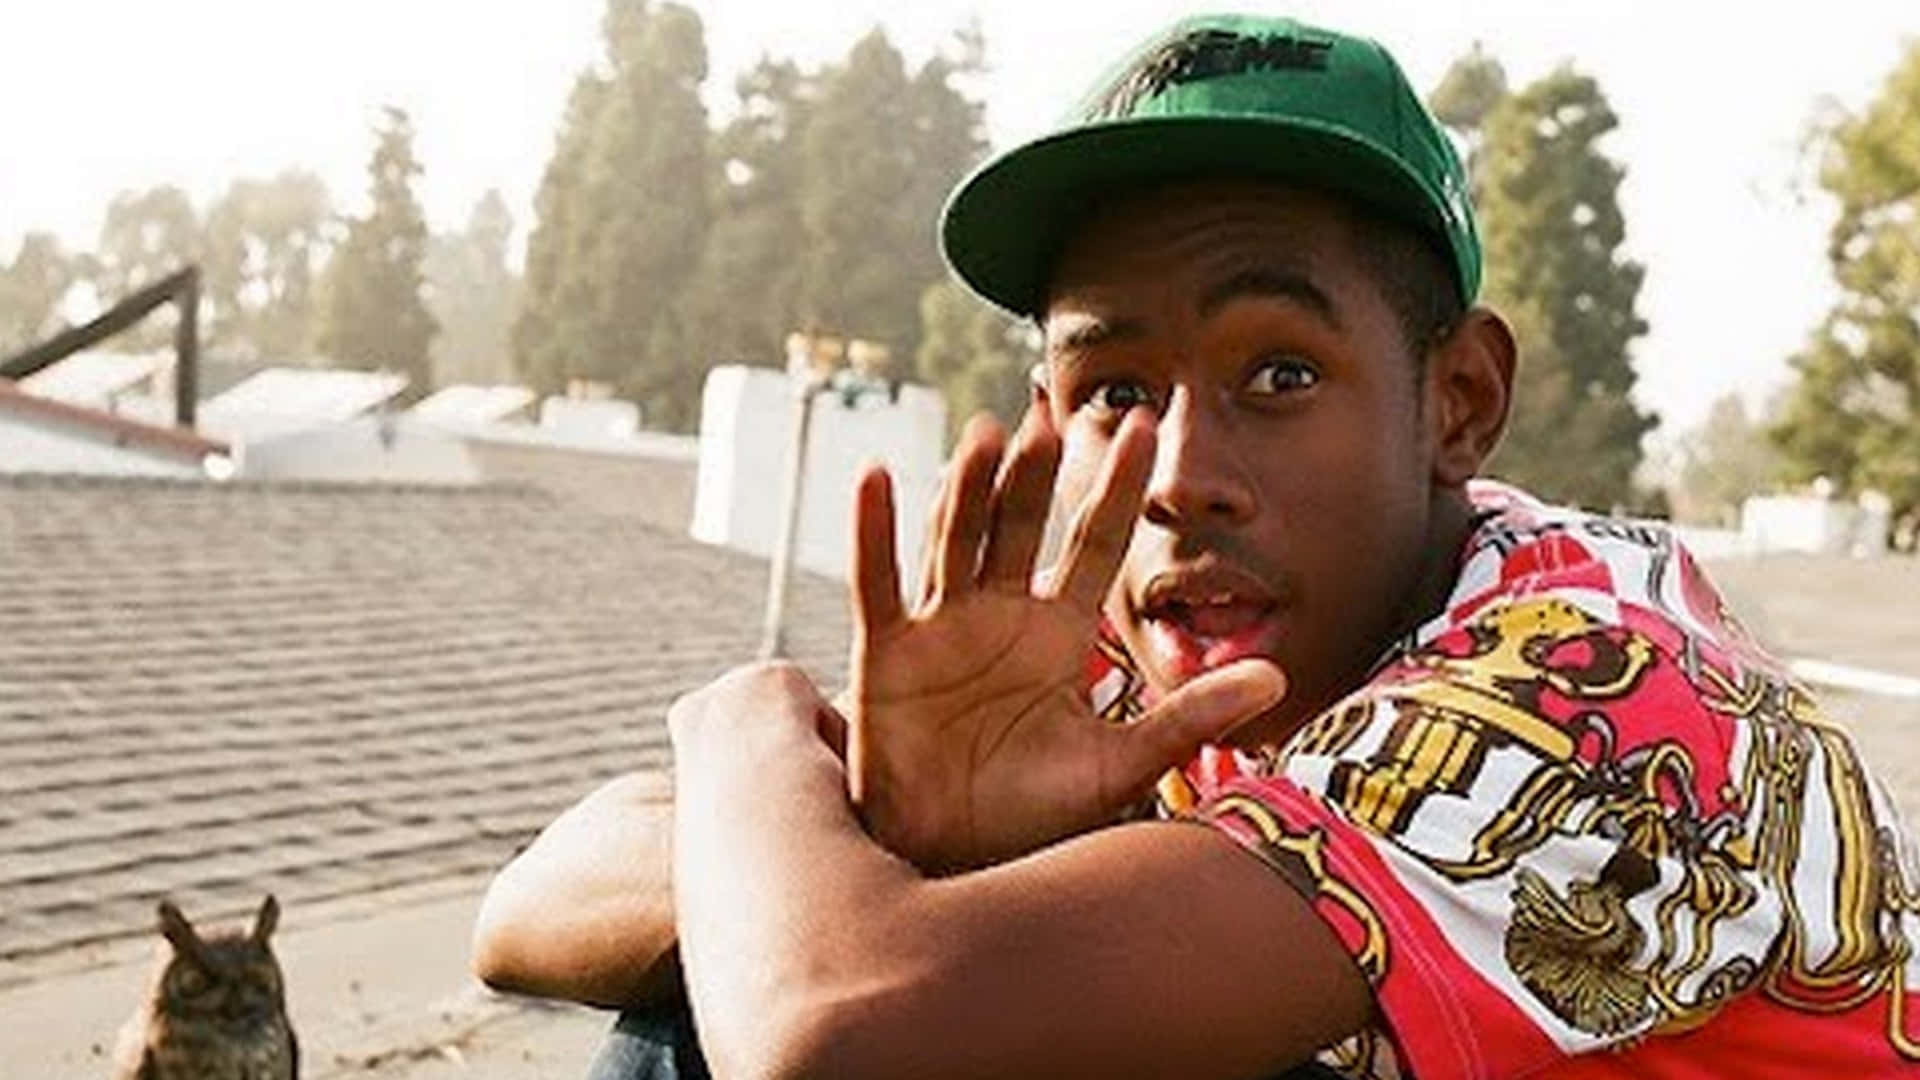 Tyler the Creator Brings Creative&Innovative Rap to the Table